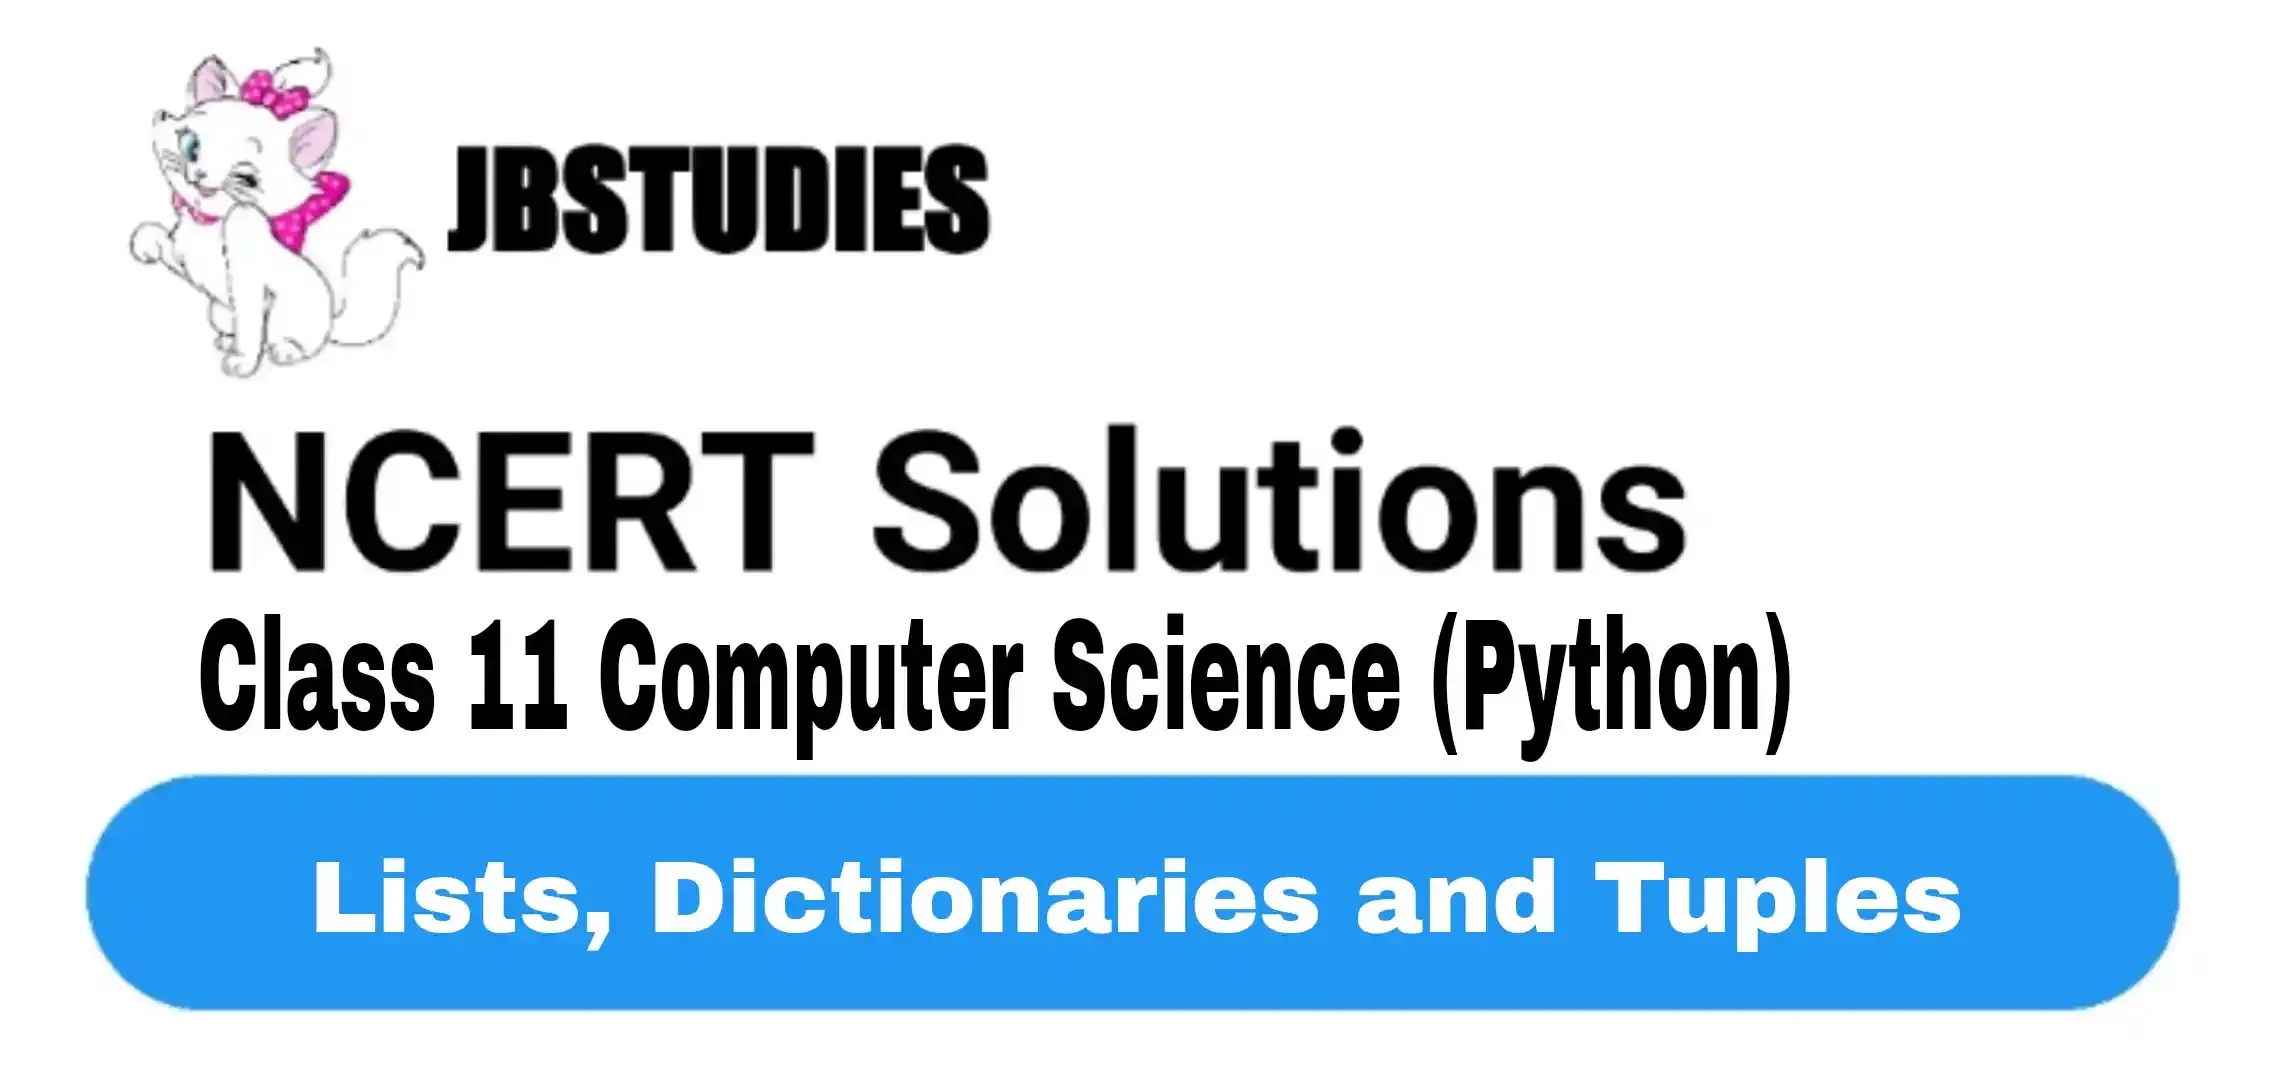 Solutions Class 11 Computer Science (Python) Chapter-13 (Lists, Dictionaries and Tuples)